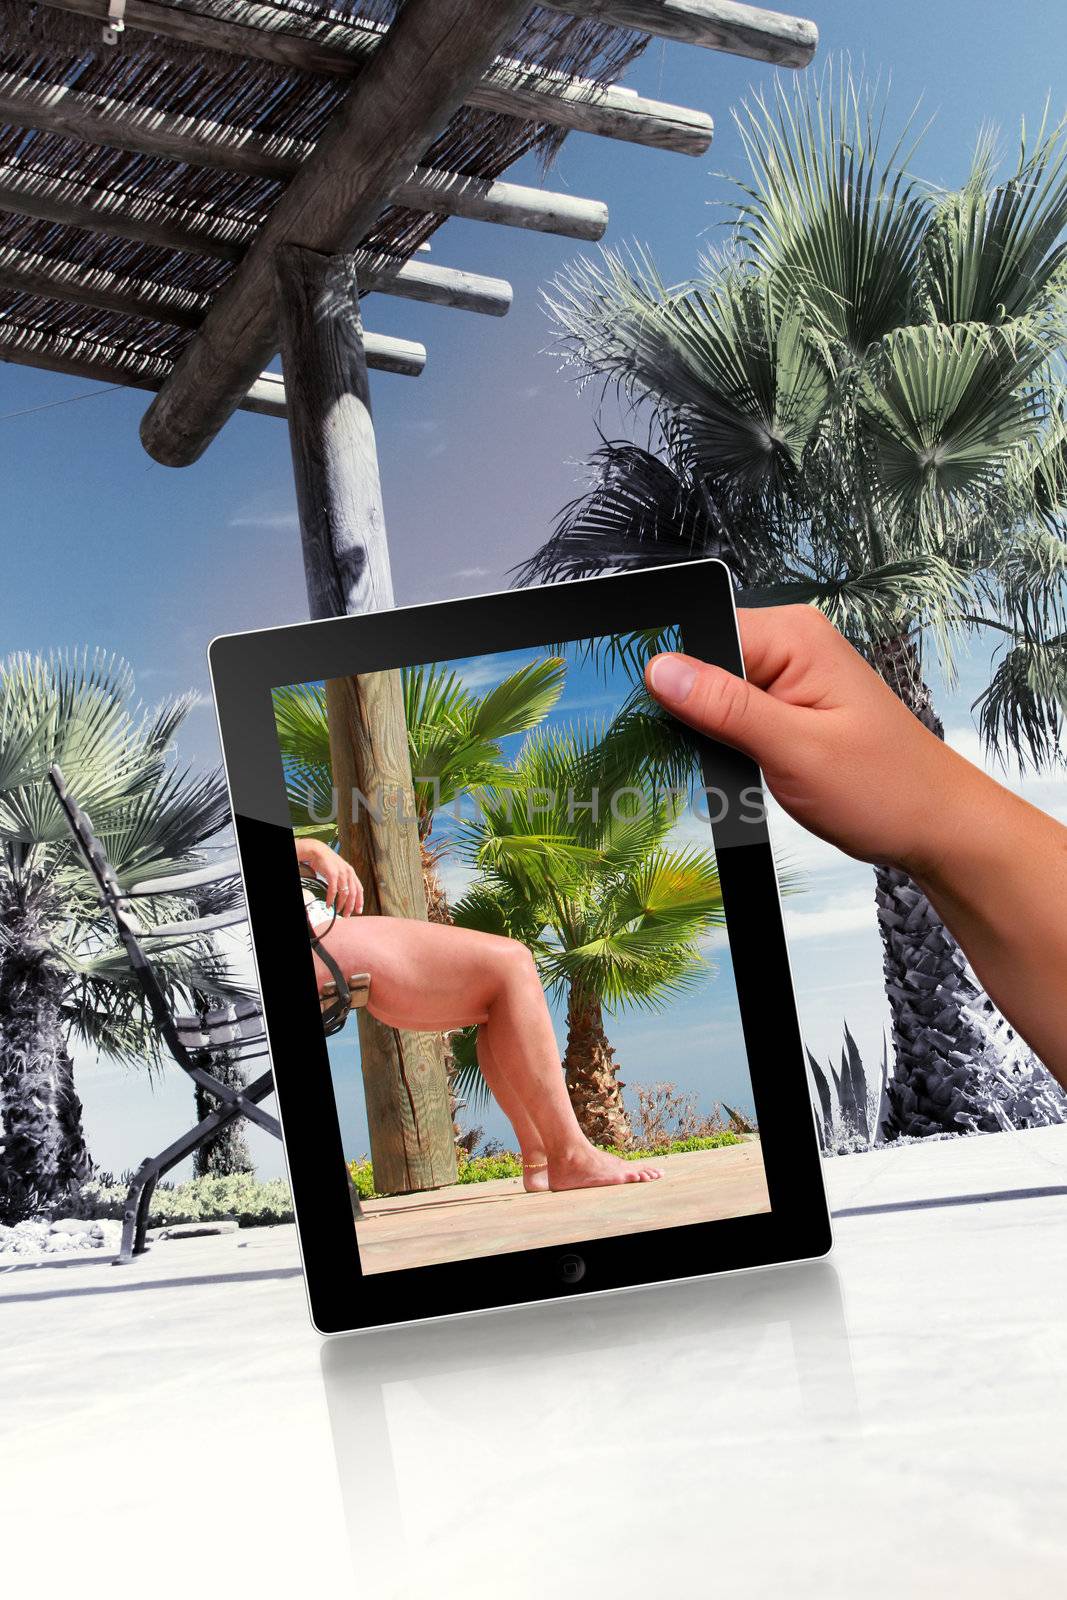 Faked relaxation scene with palm and tablet pc